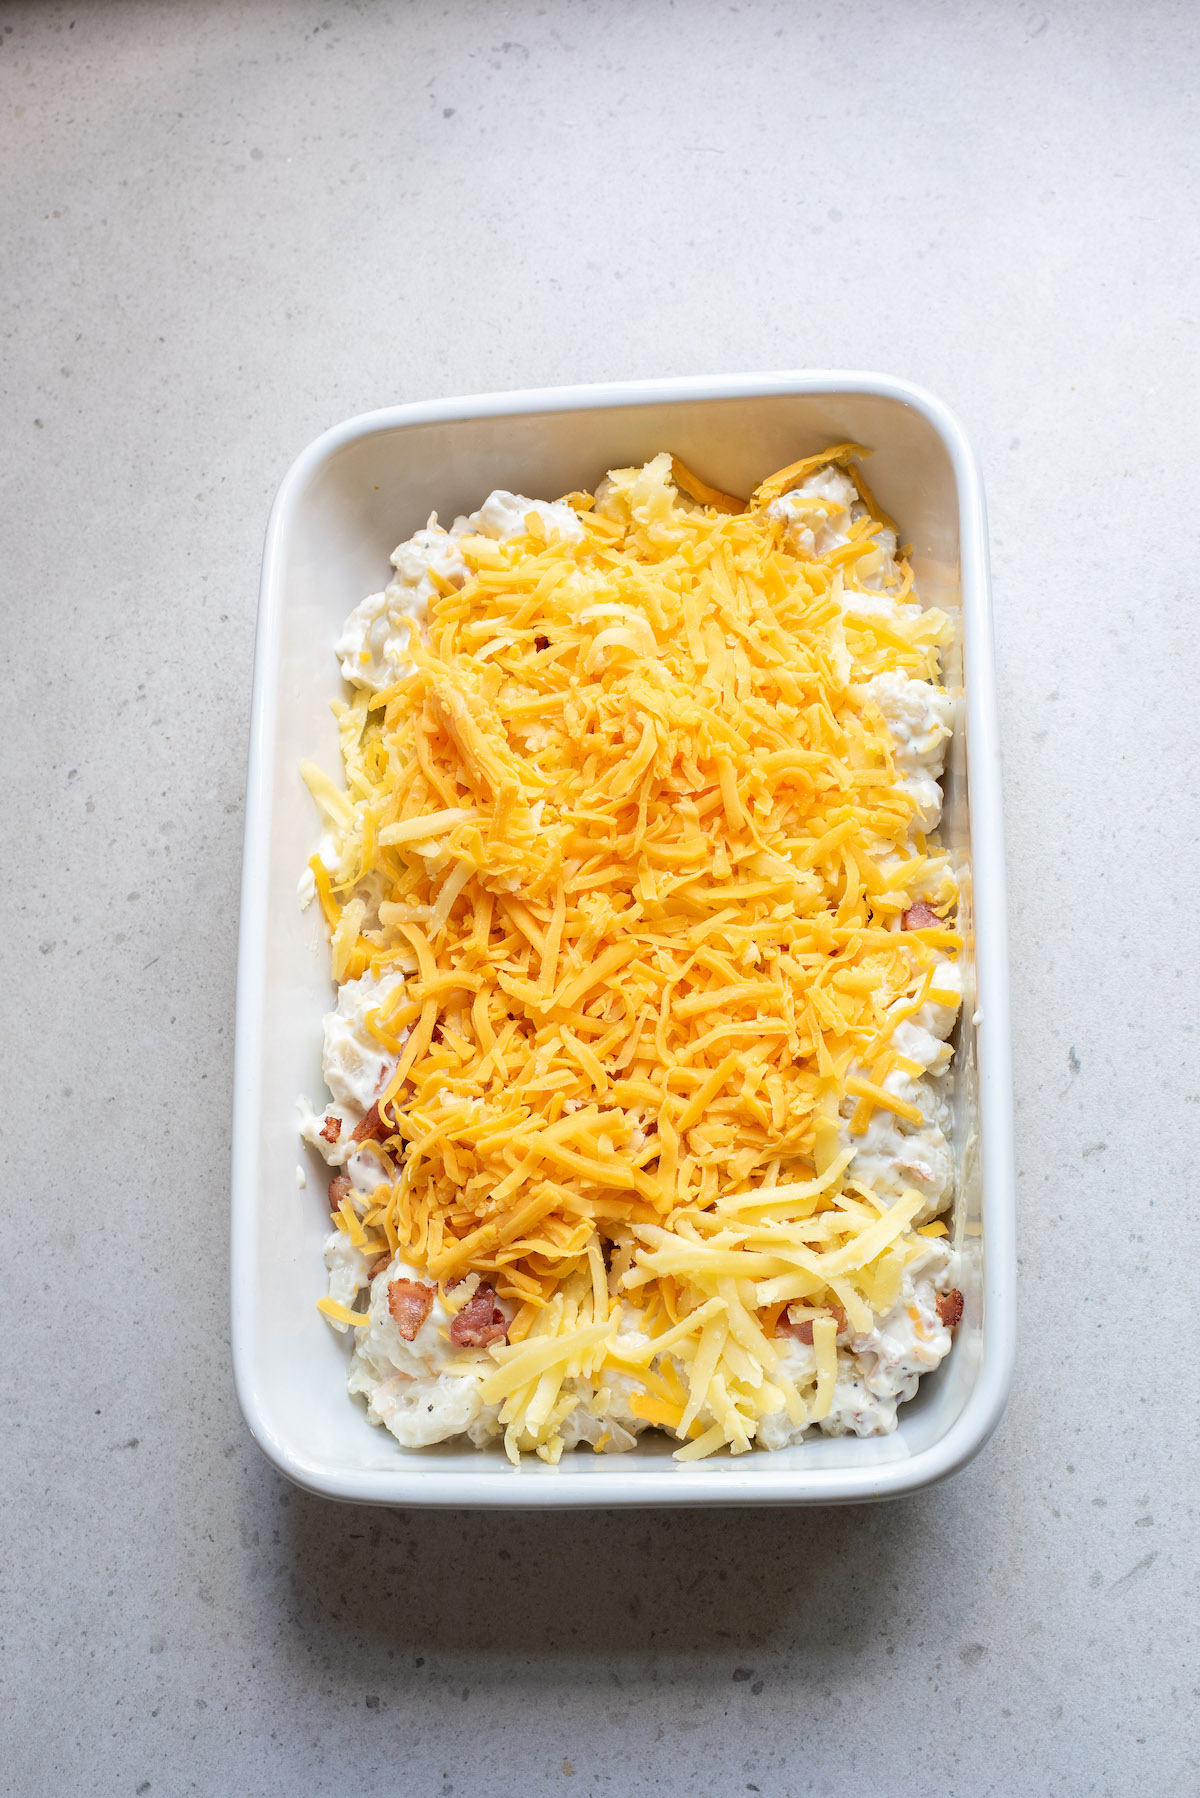 the unbaked casserole topped with shredded cheese